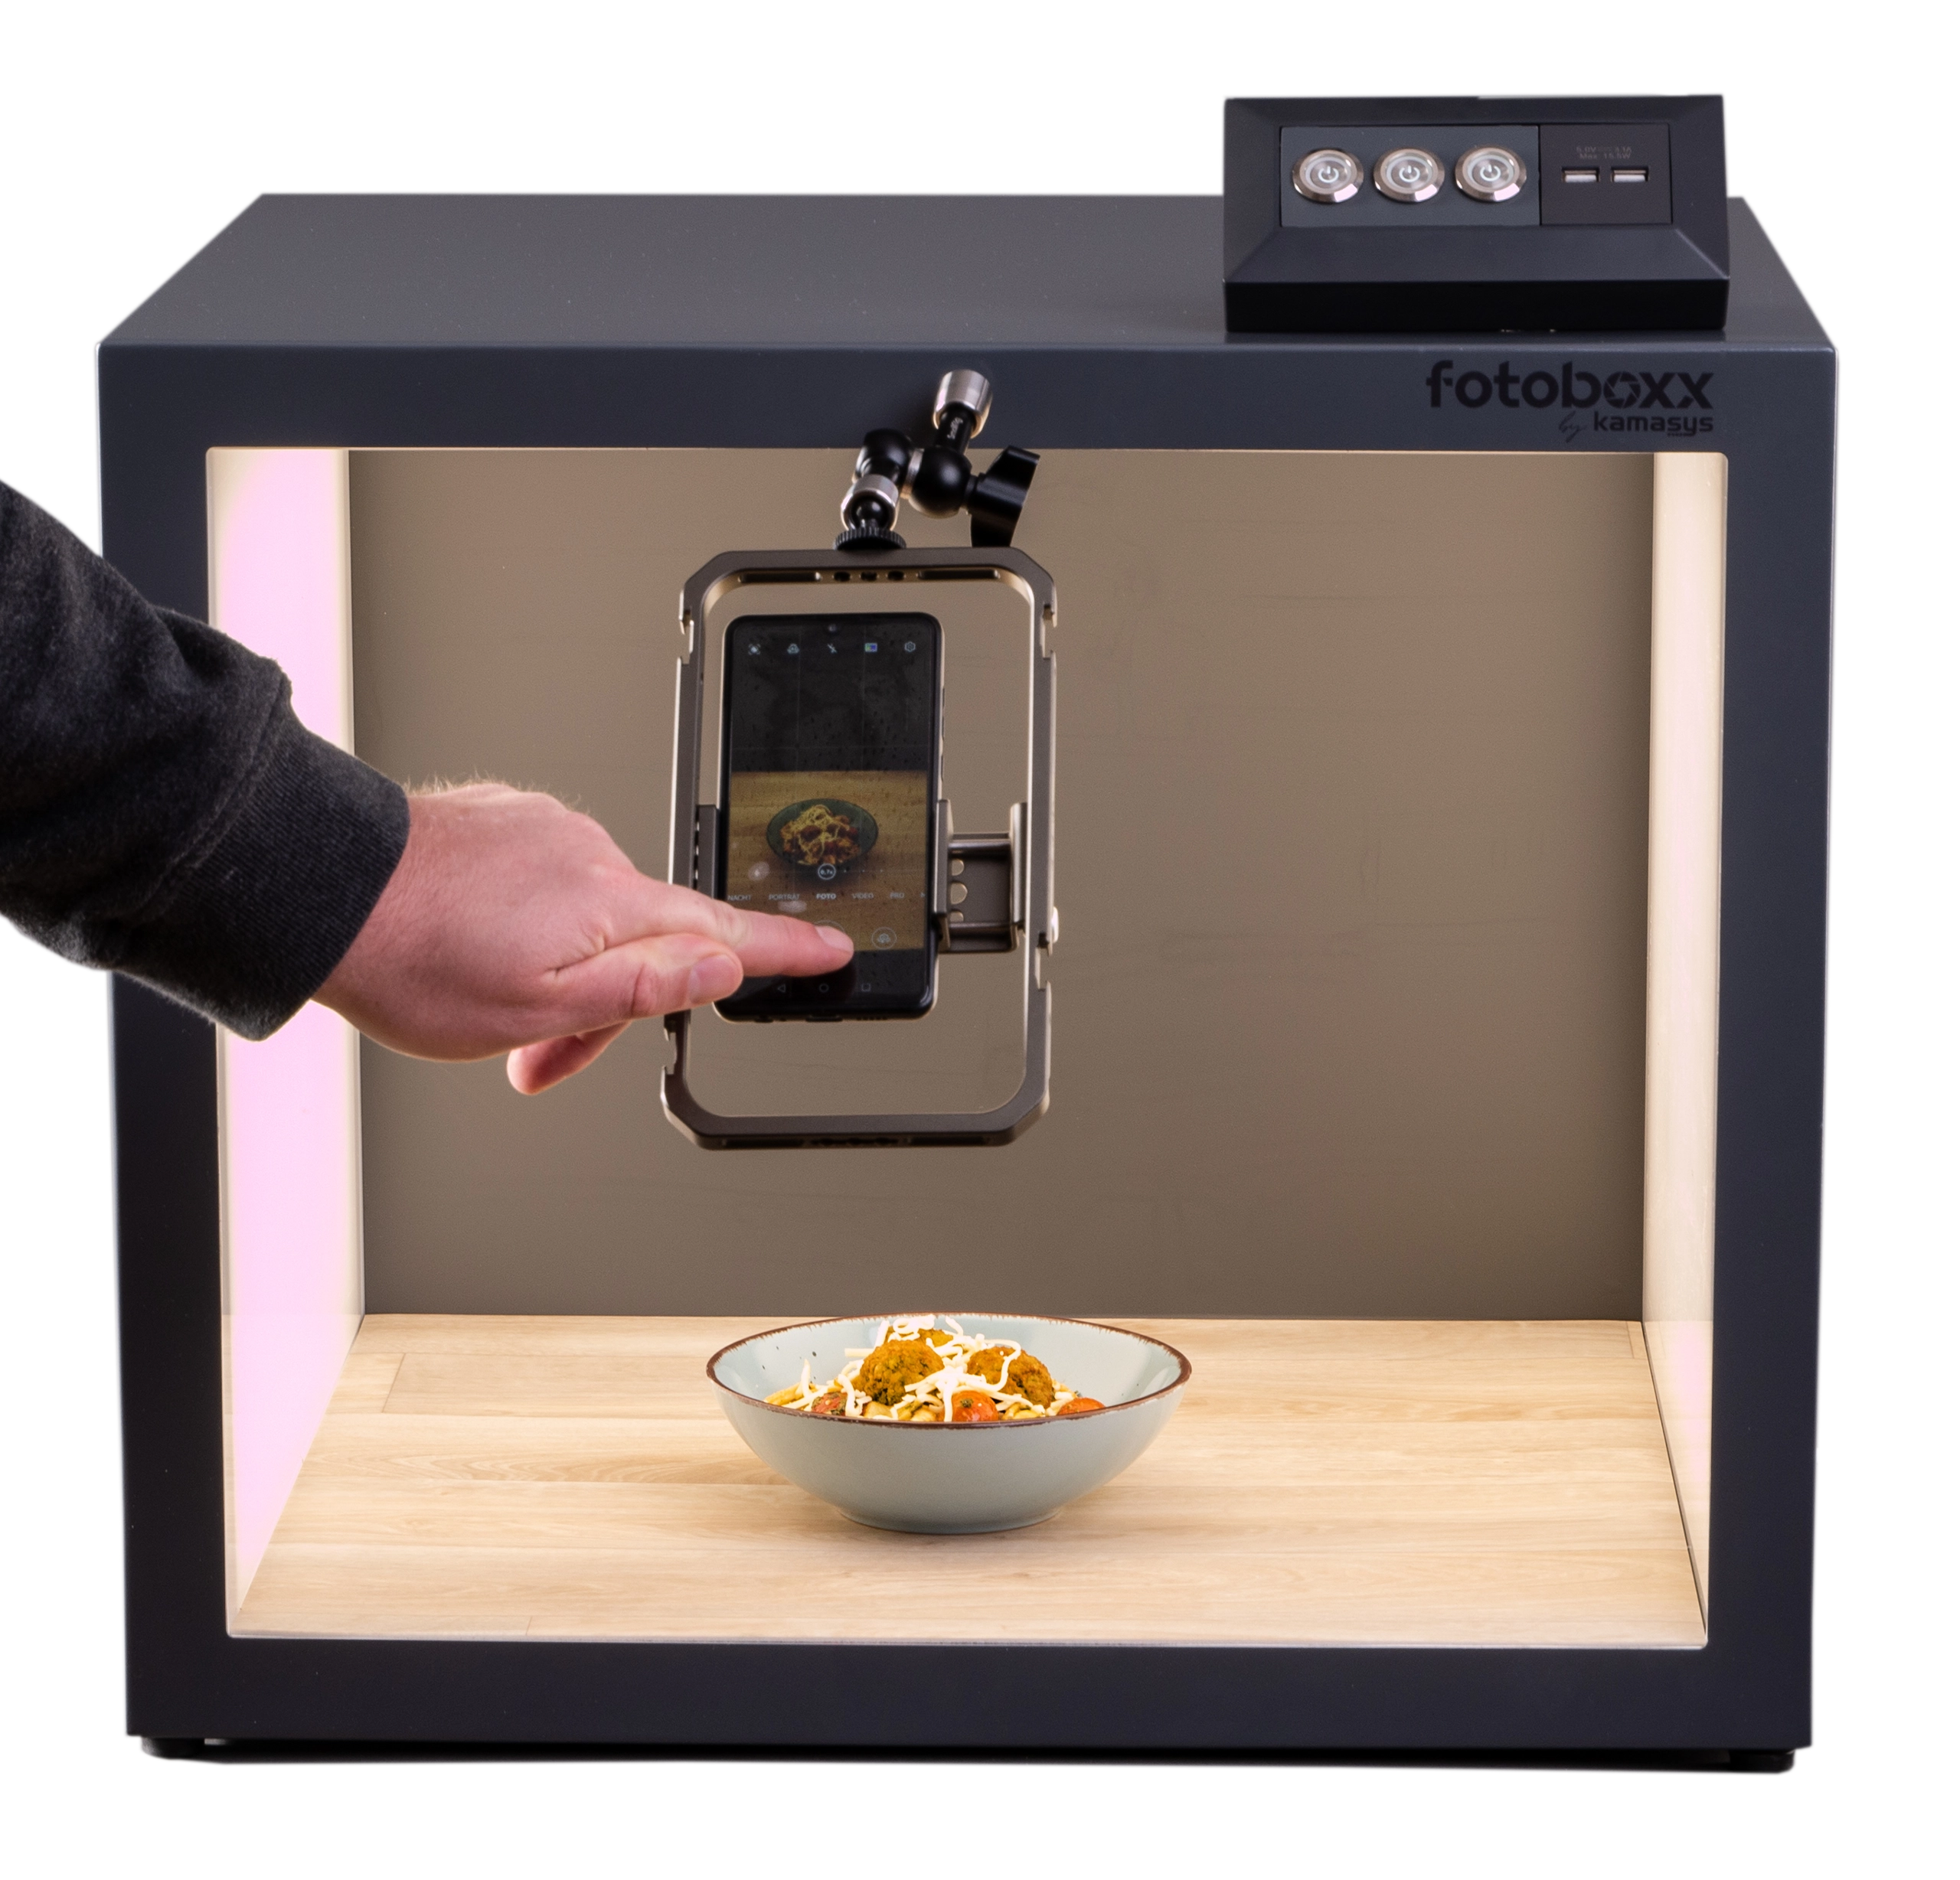 The Fotoboxx from kamasys for professional food photography - easy operation via smartphone